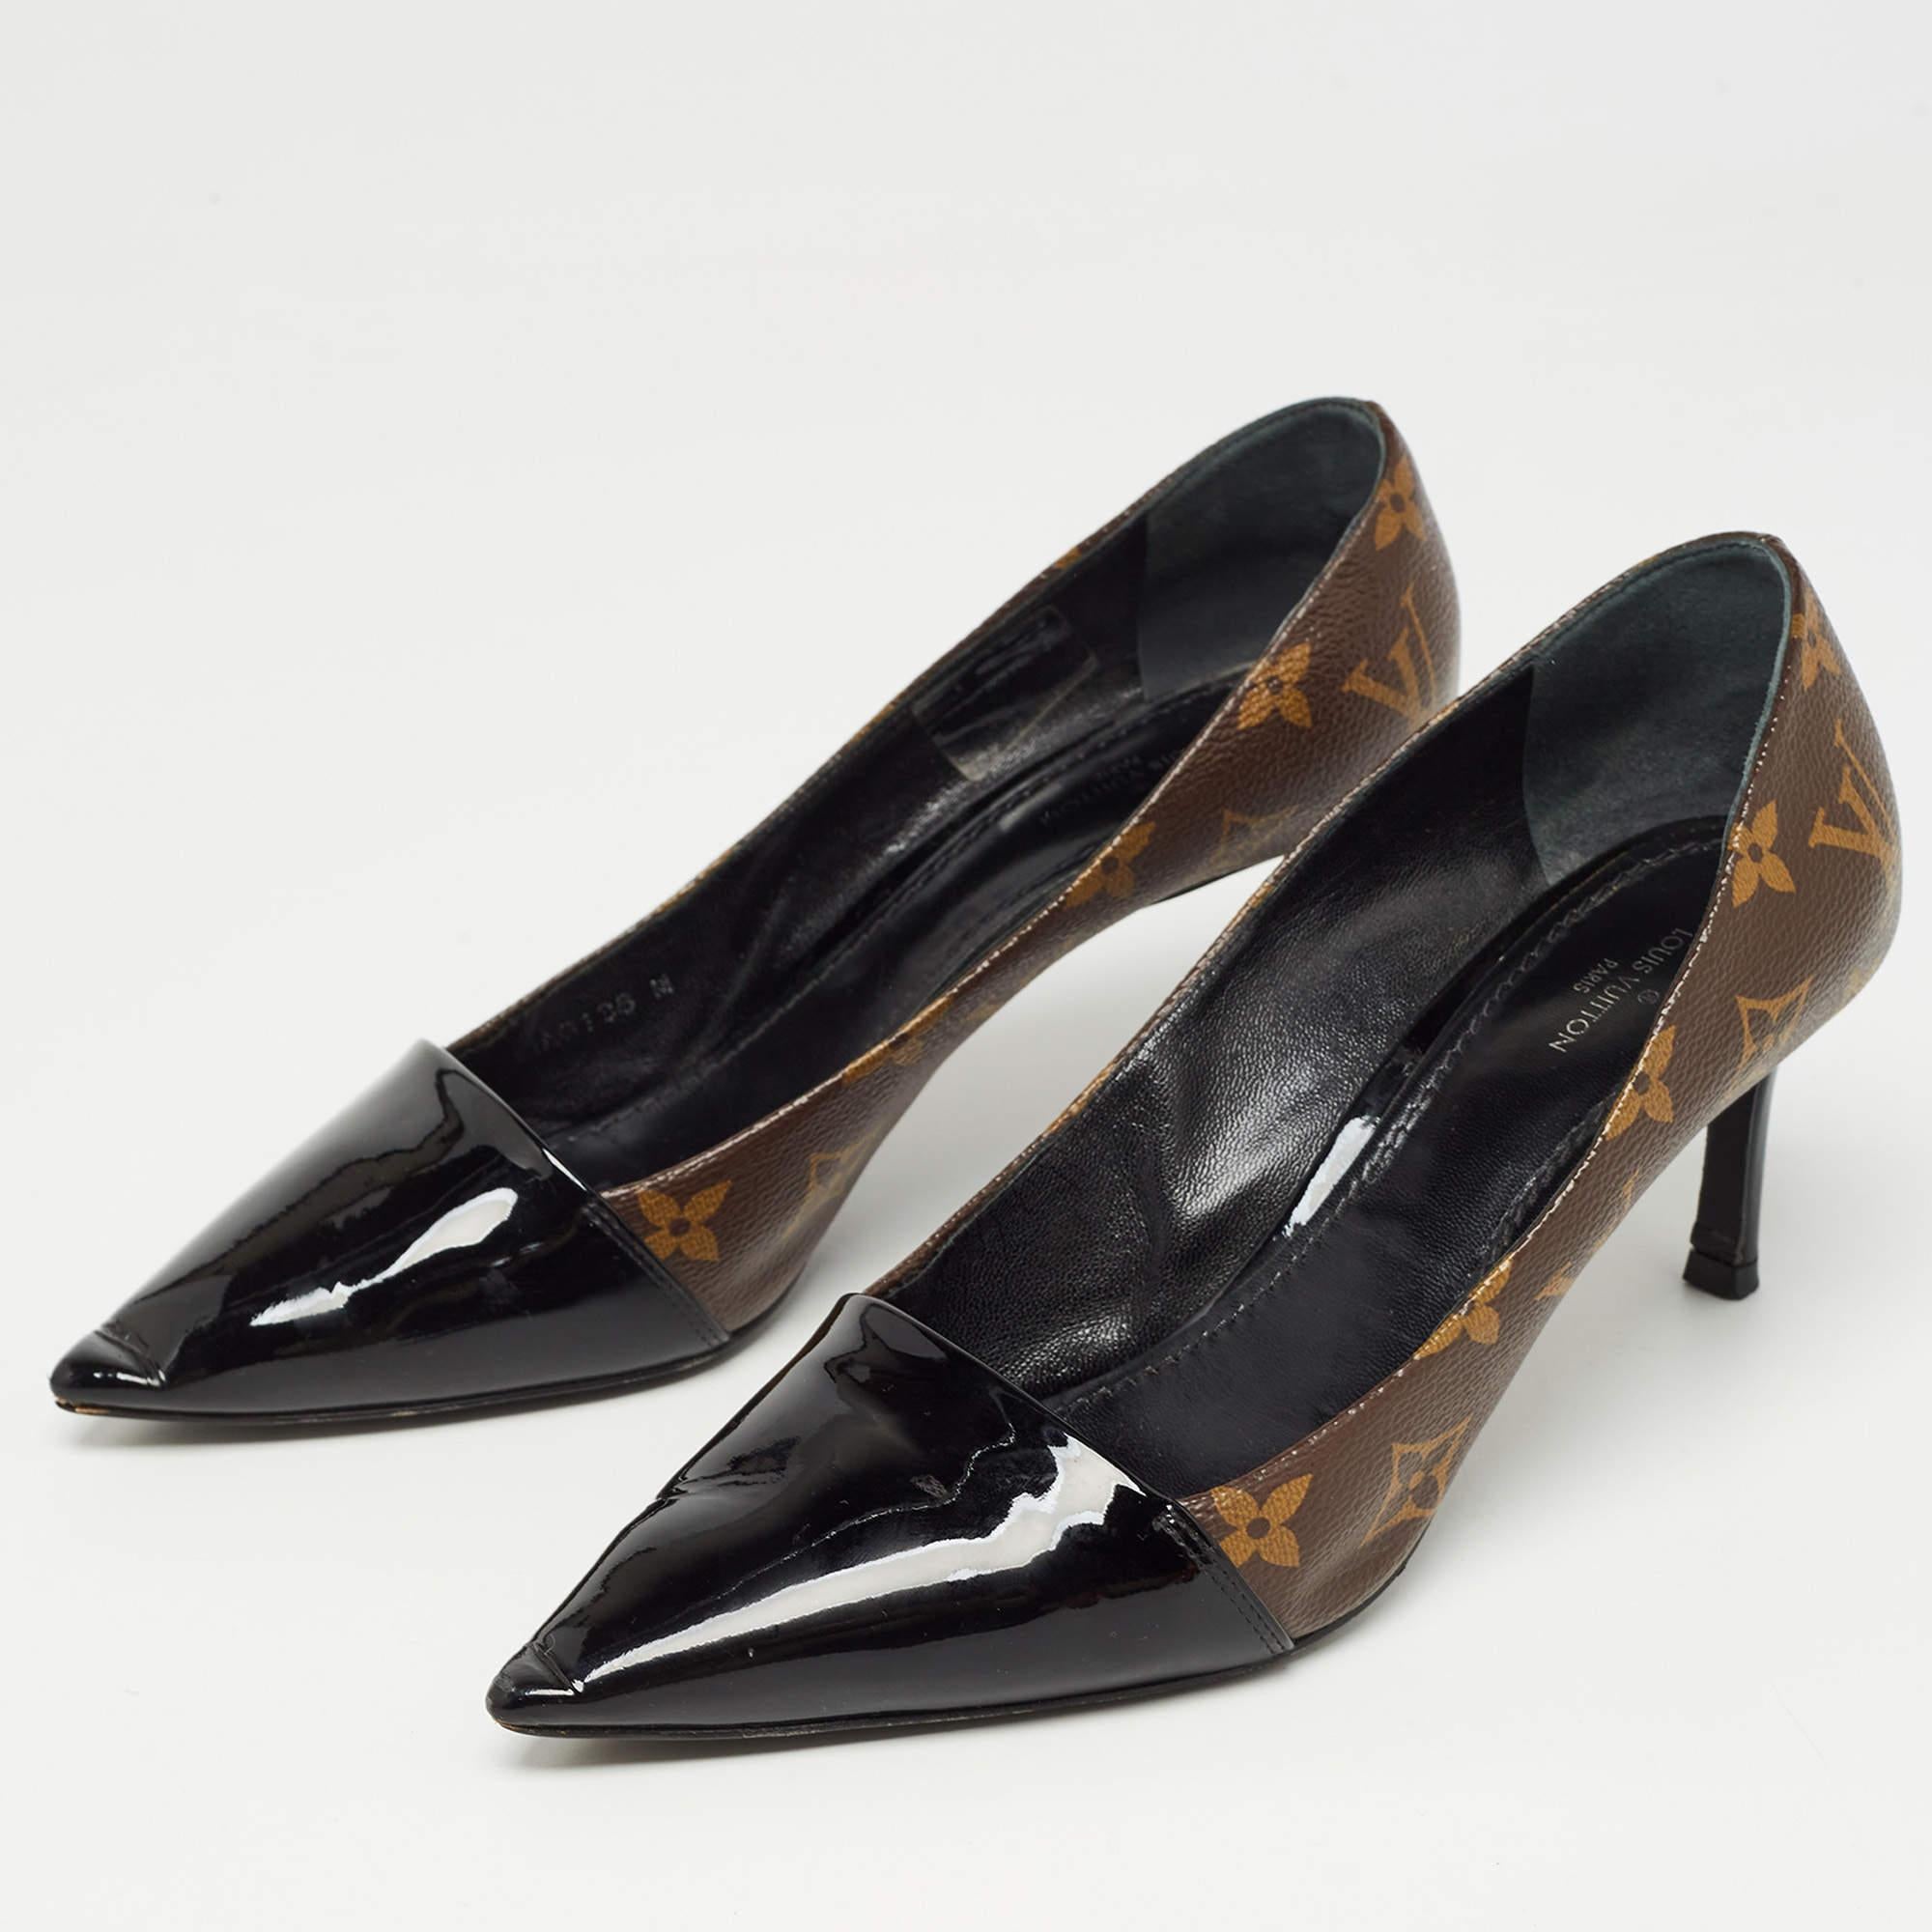 The fashion house’s tradition of excellence, coupled with modern design sensibilities, works to make these LV pumps a fabulous choice. They'll help you deliver a chic look with ease.

